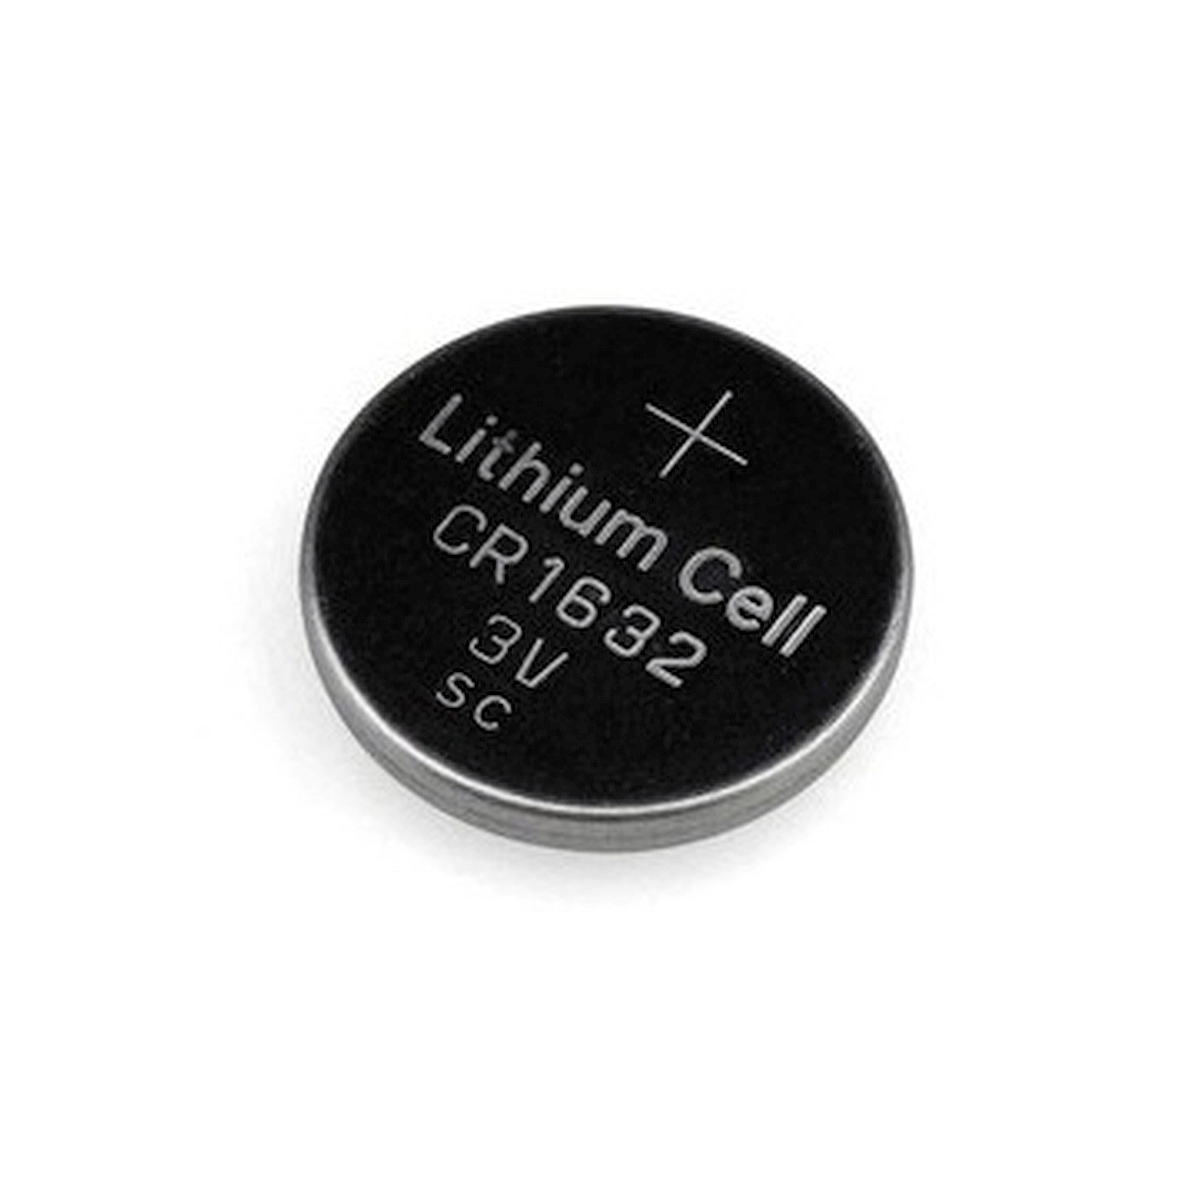 CR1632 Lithium battery, 4 pieces